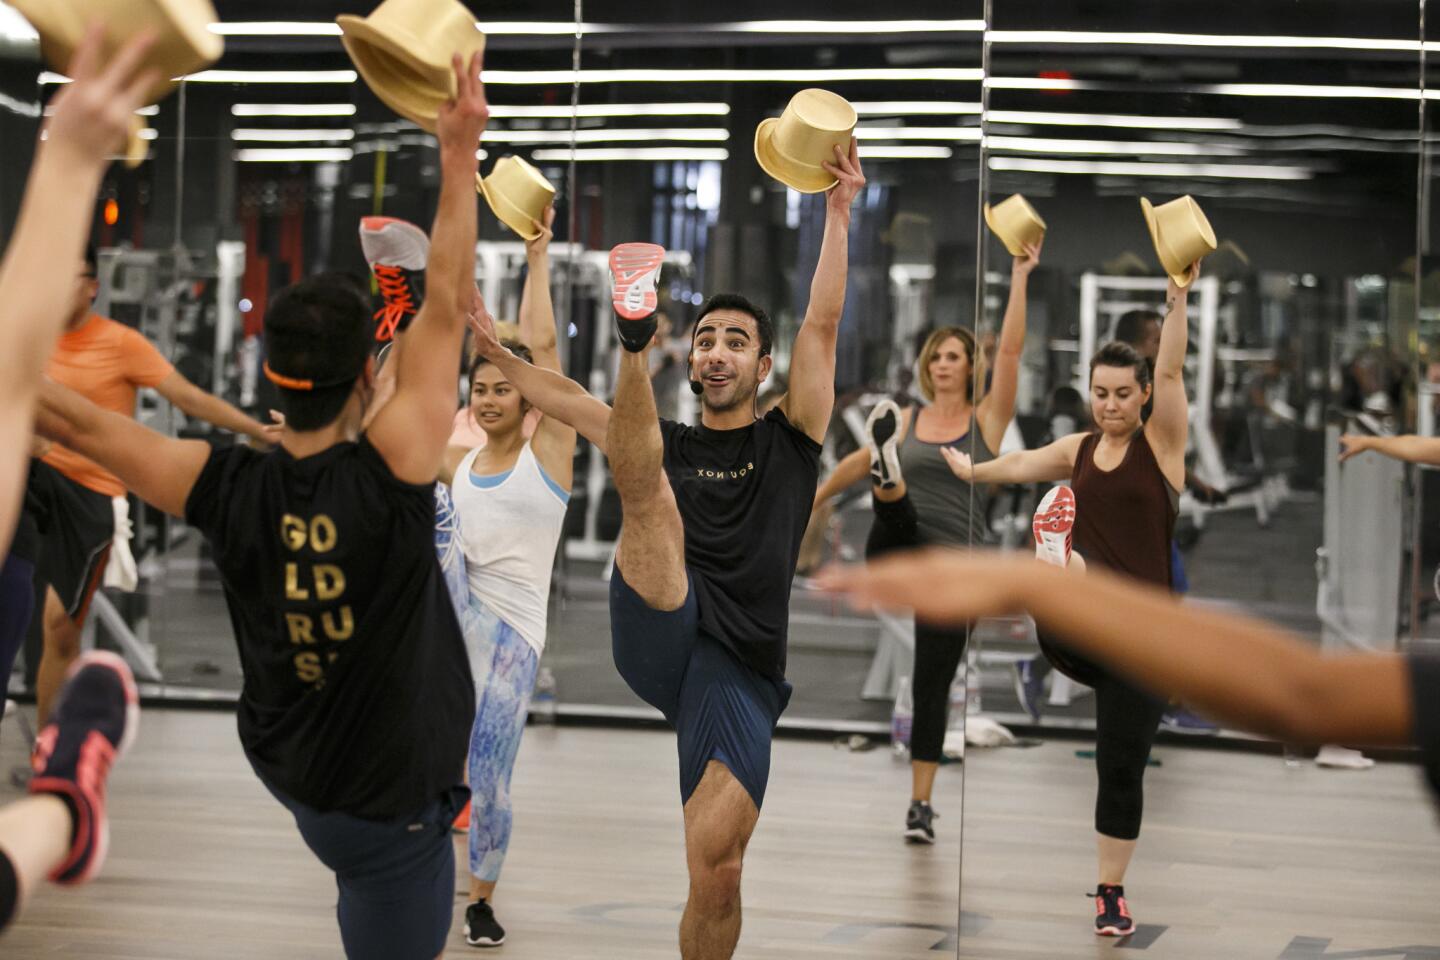 The Hollywood location has classes aimed at the industry crowd, said Equinox Chief Executive Harvey Spevak, including dance-fitness classes 5-6-7-Broadway! (pictured), Cardio Hip Hop Funk and Classical Ballet.